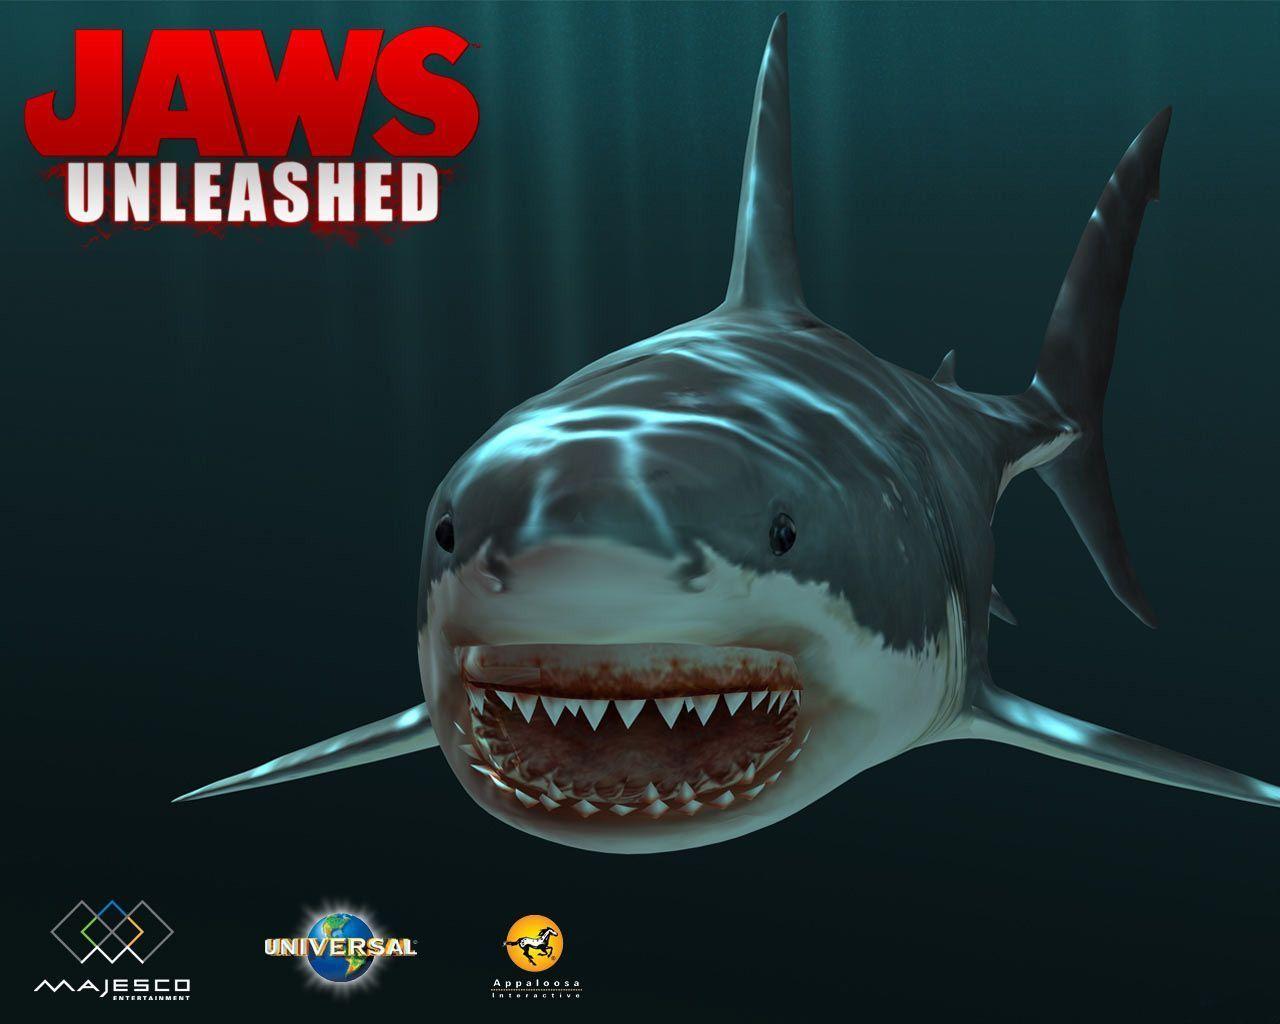 Jaws Unleashed Wallpaper for The Game 1280x1024PX Wallpaper Jaws